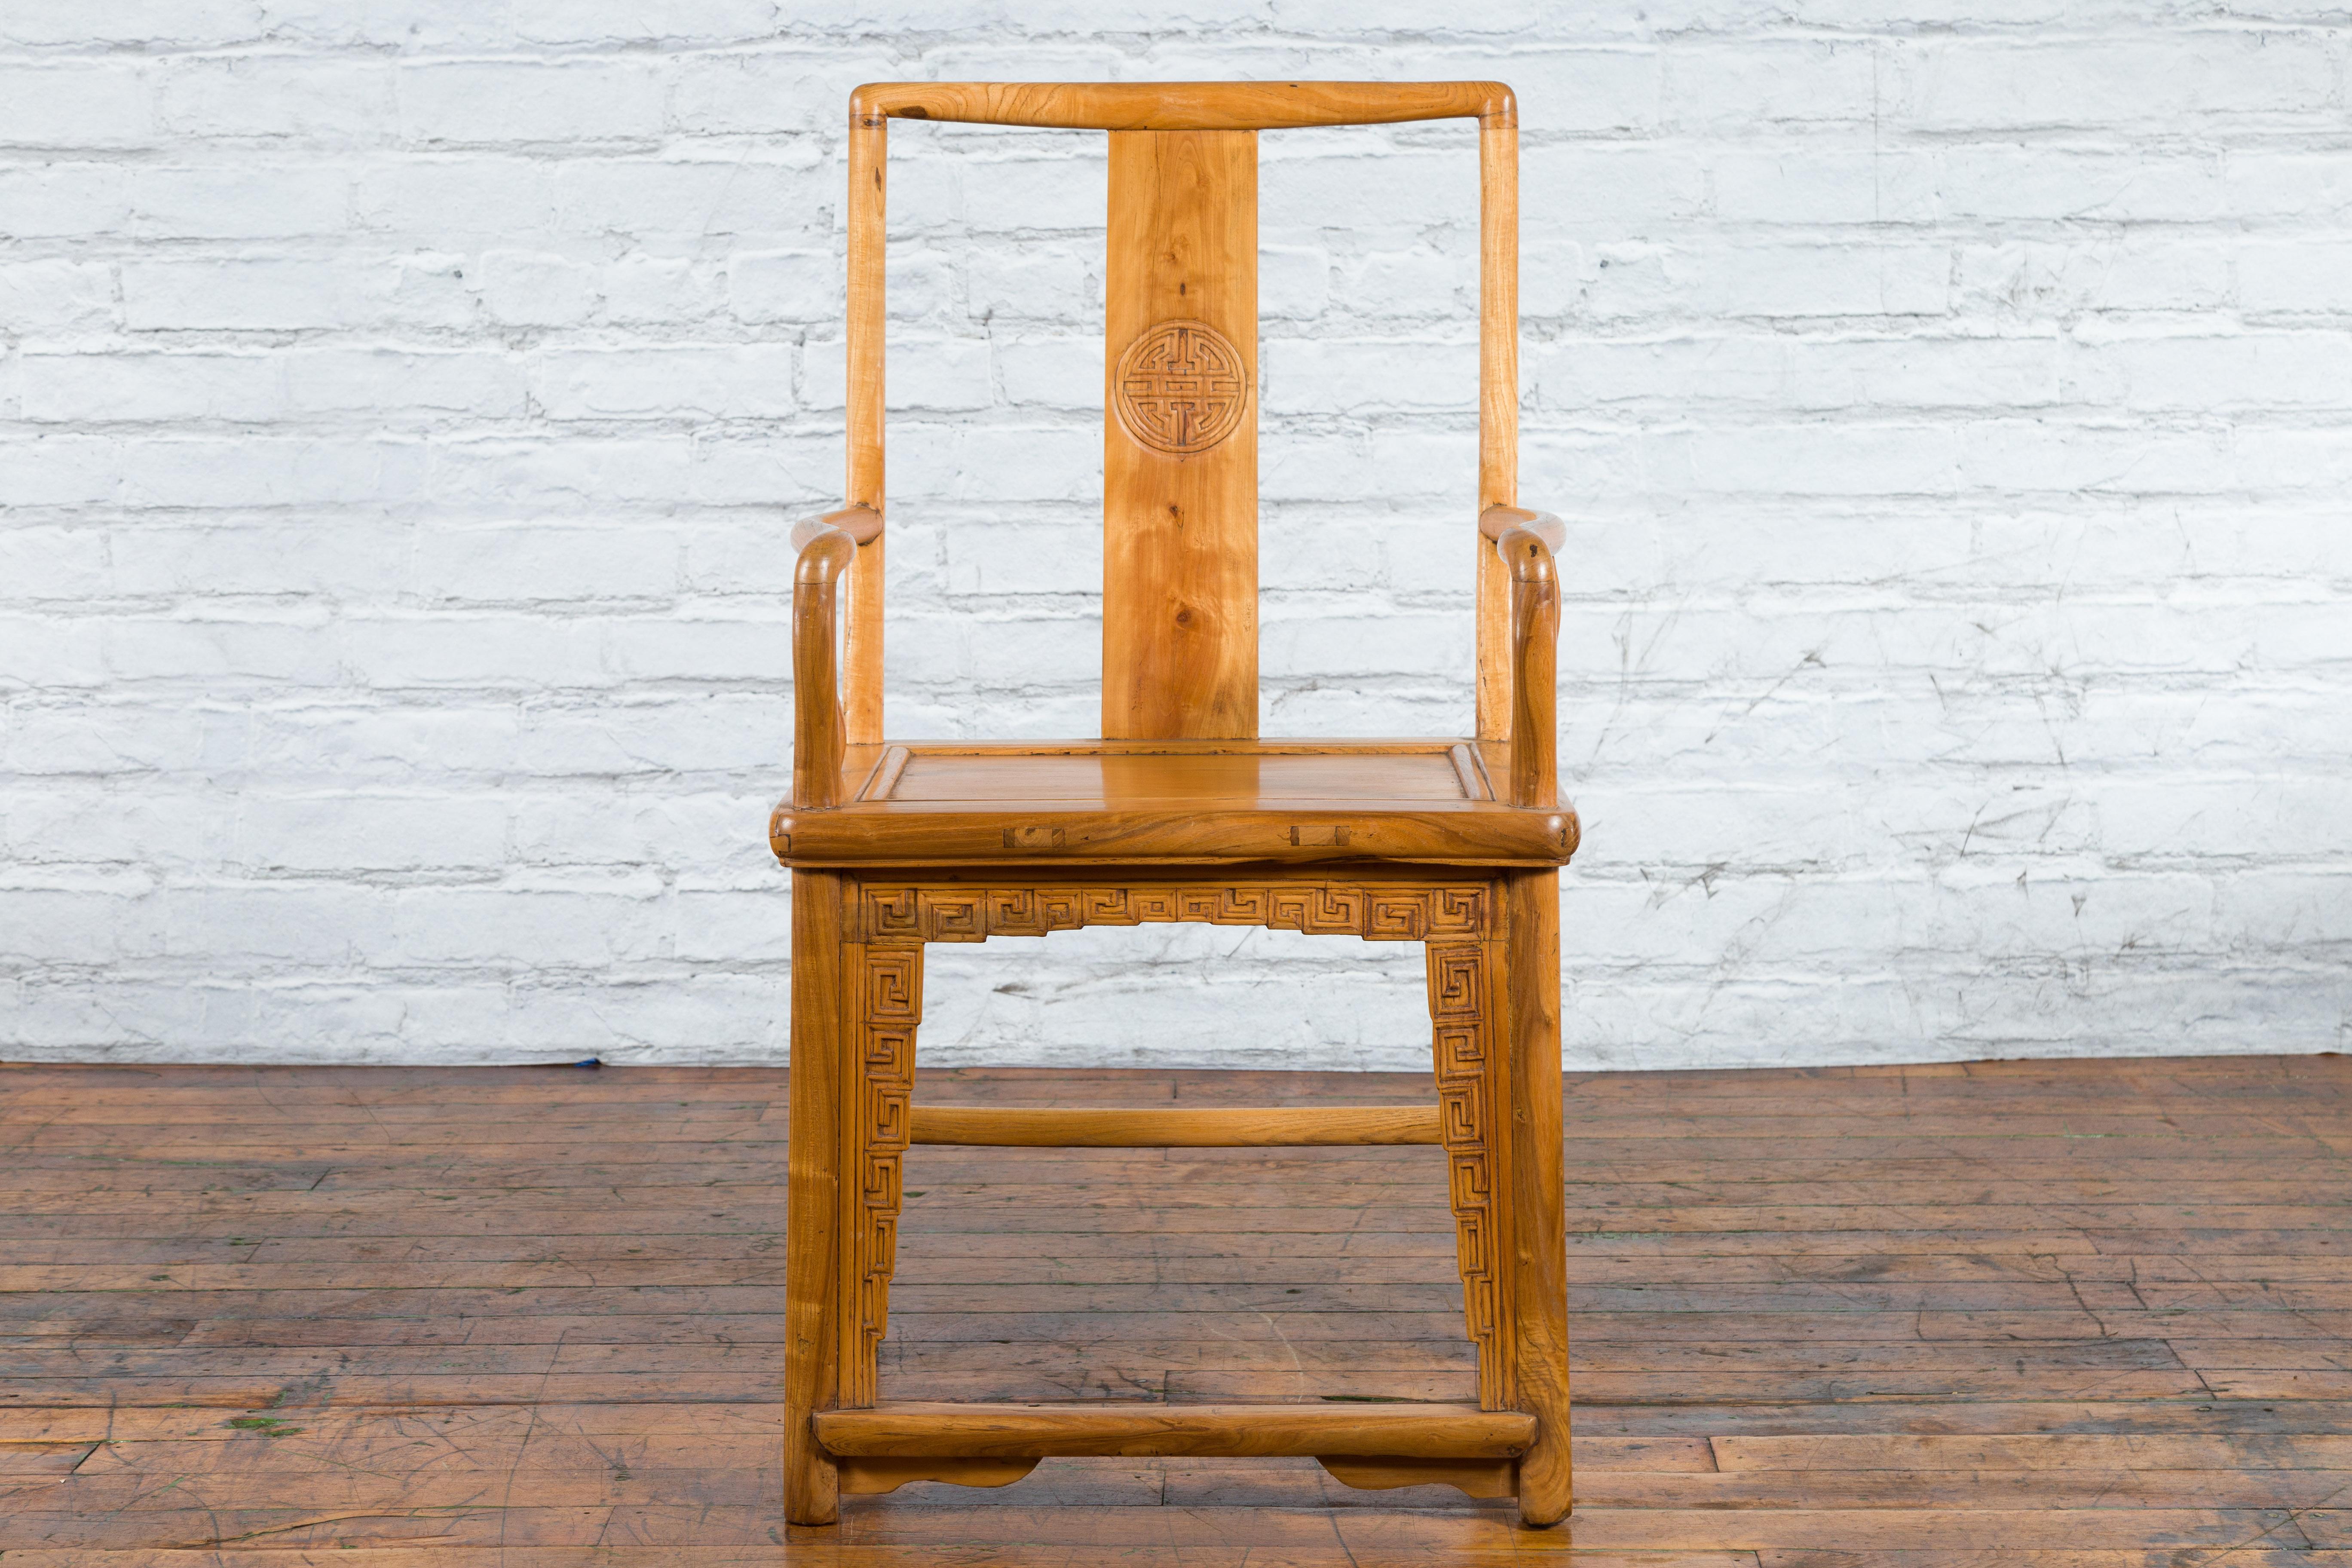 A Chinese Qing Dynasty period elm wood armchair from the 19th century, with open back, carved splat, serpentine arms, wooden seat and meander-carved apron. Created in China during the Qing Dynasty period in the 19th century, this elm wood armchair